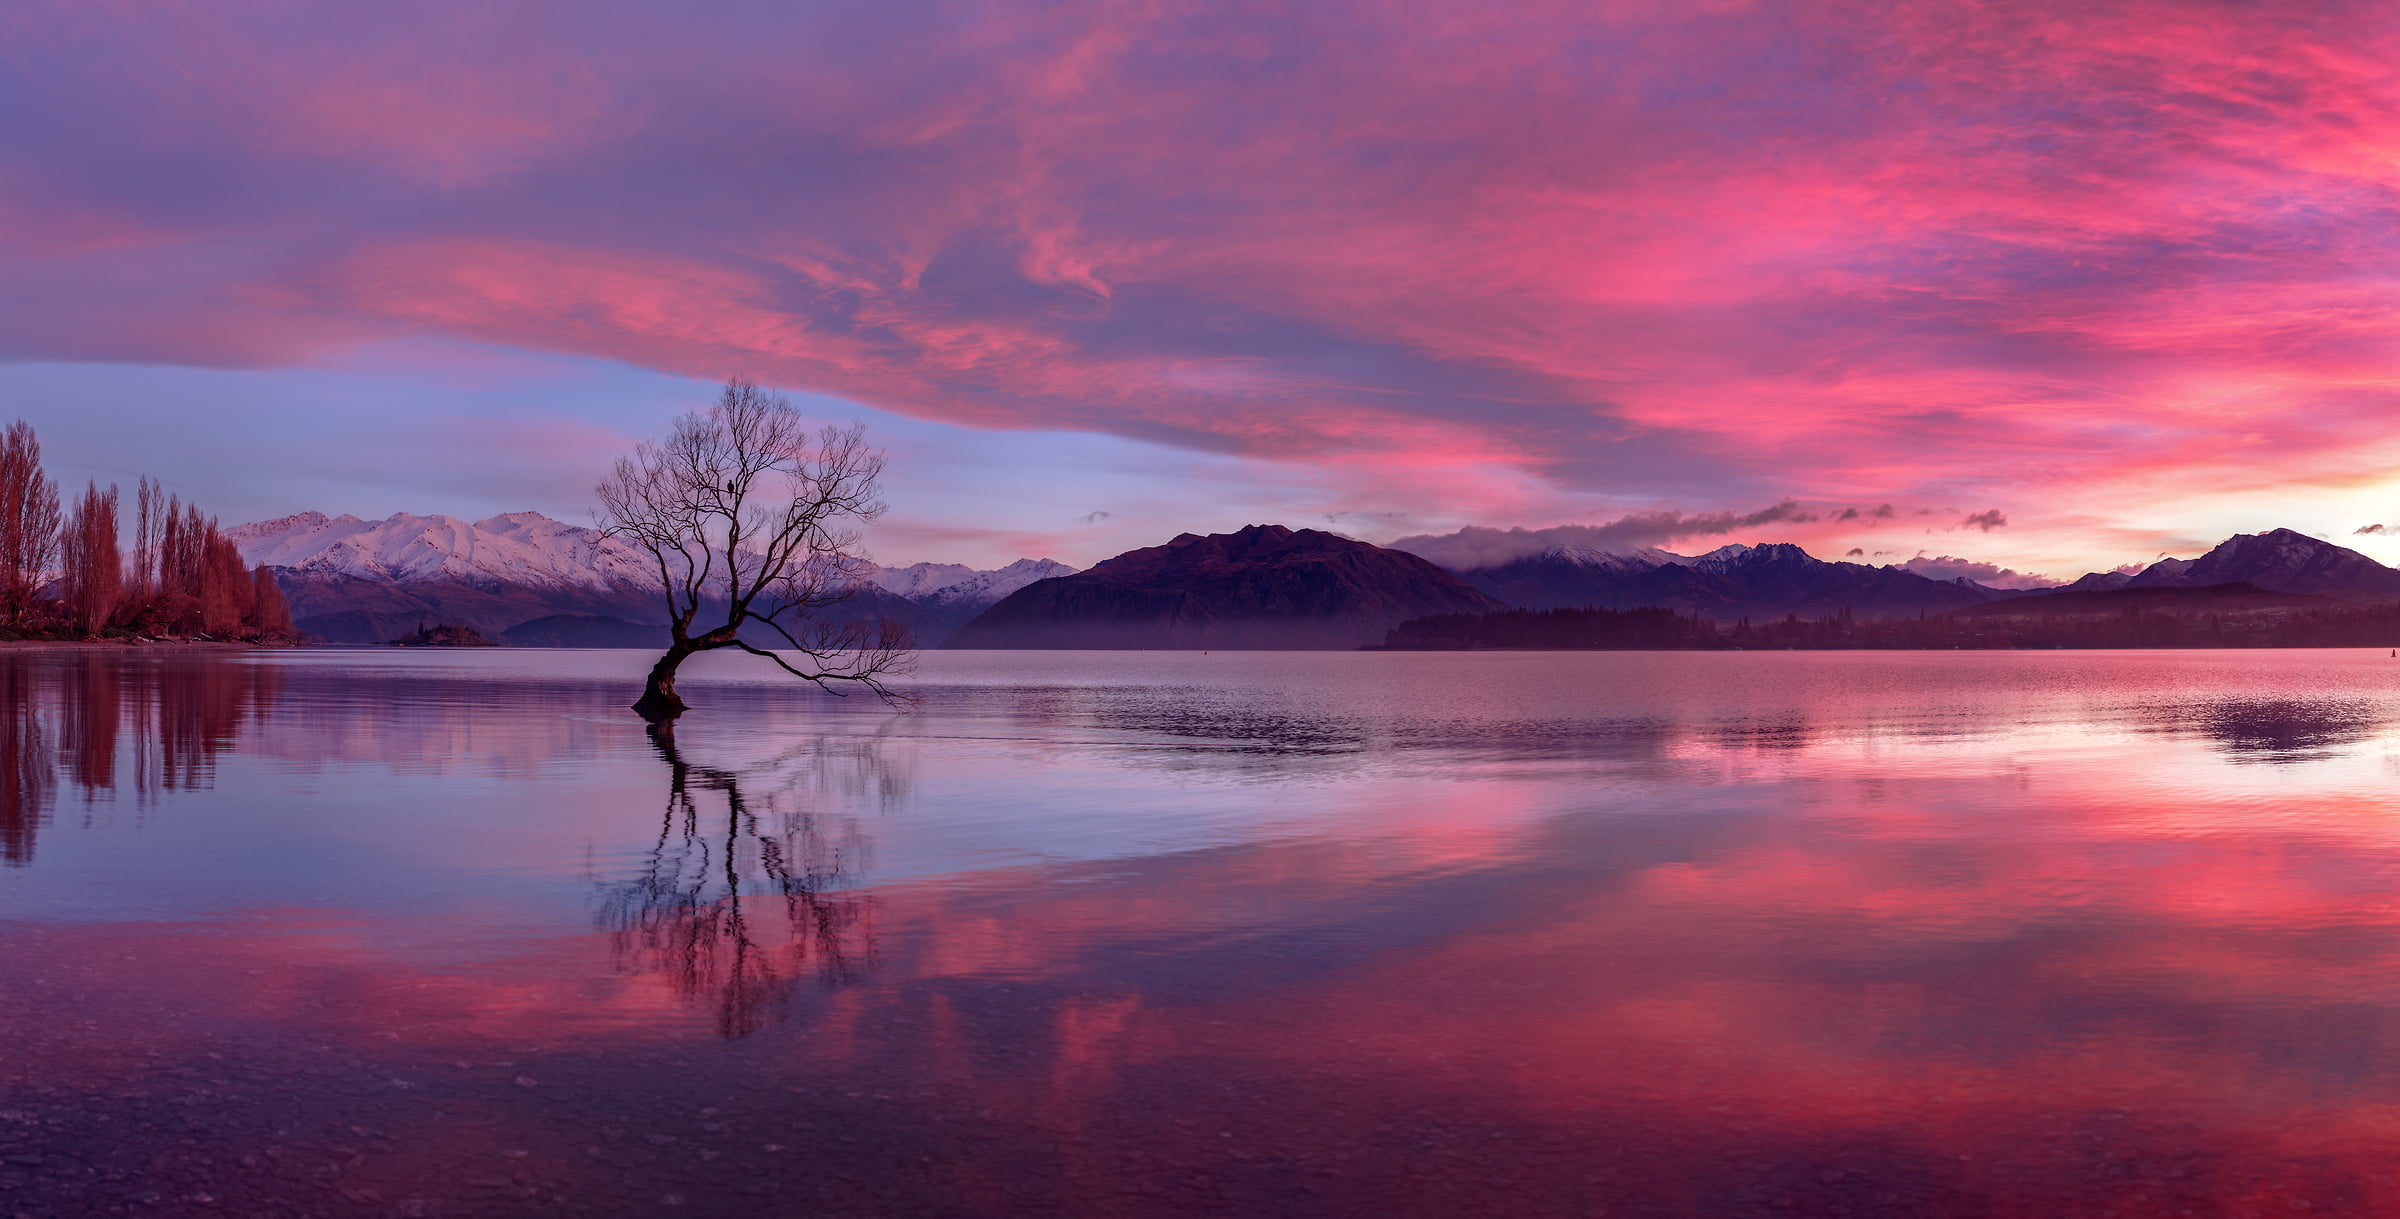 366 megapixels! A very high resolution, large-format VAST photo print of a peaceful water landscape scene; photograph created by Chris Collacott in Wanaka Lake, New Zealand